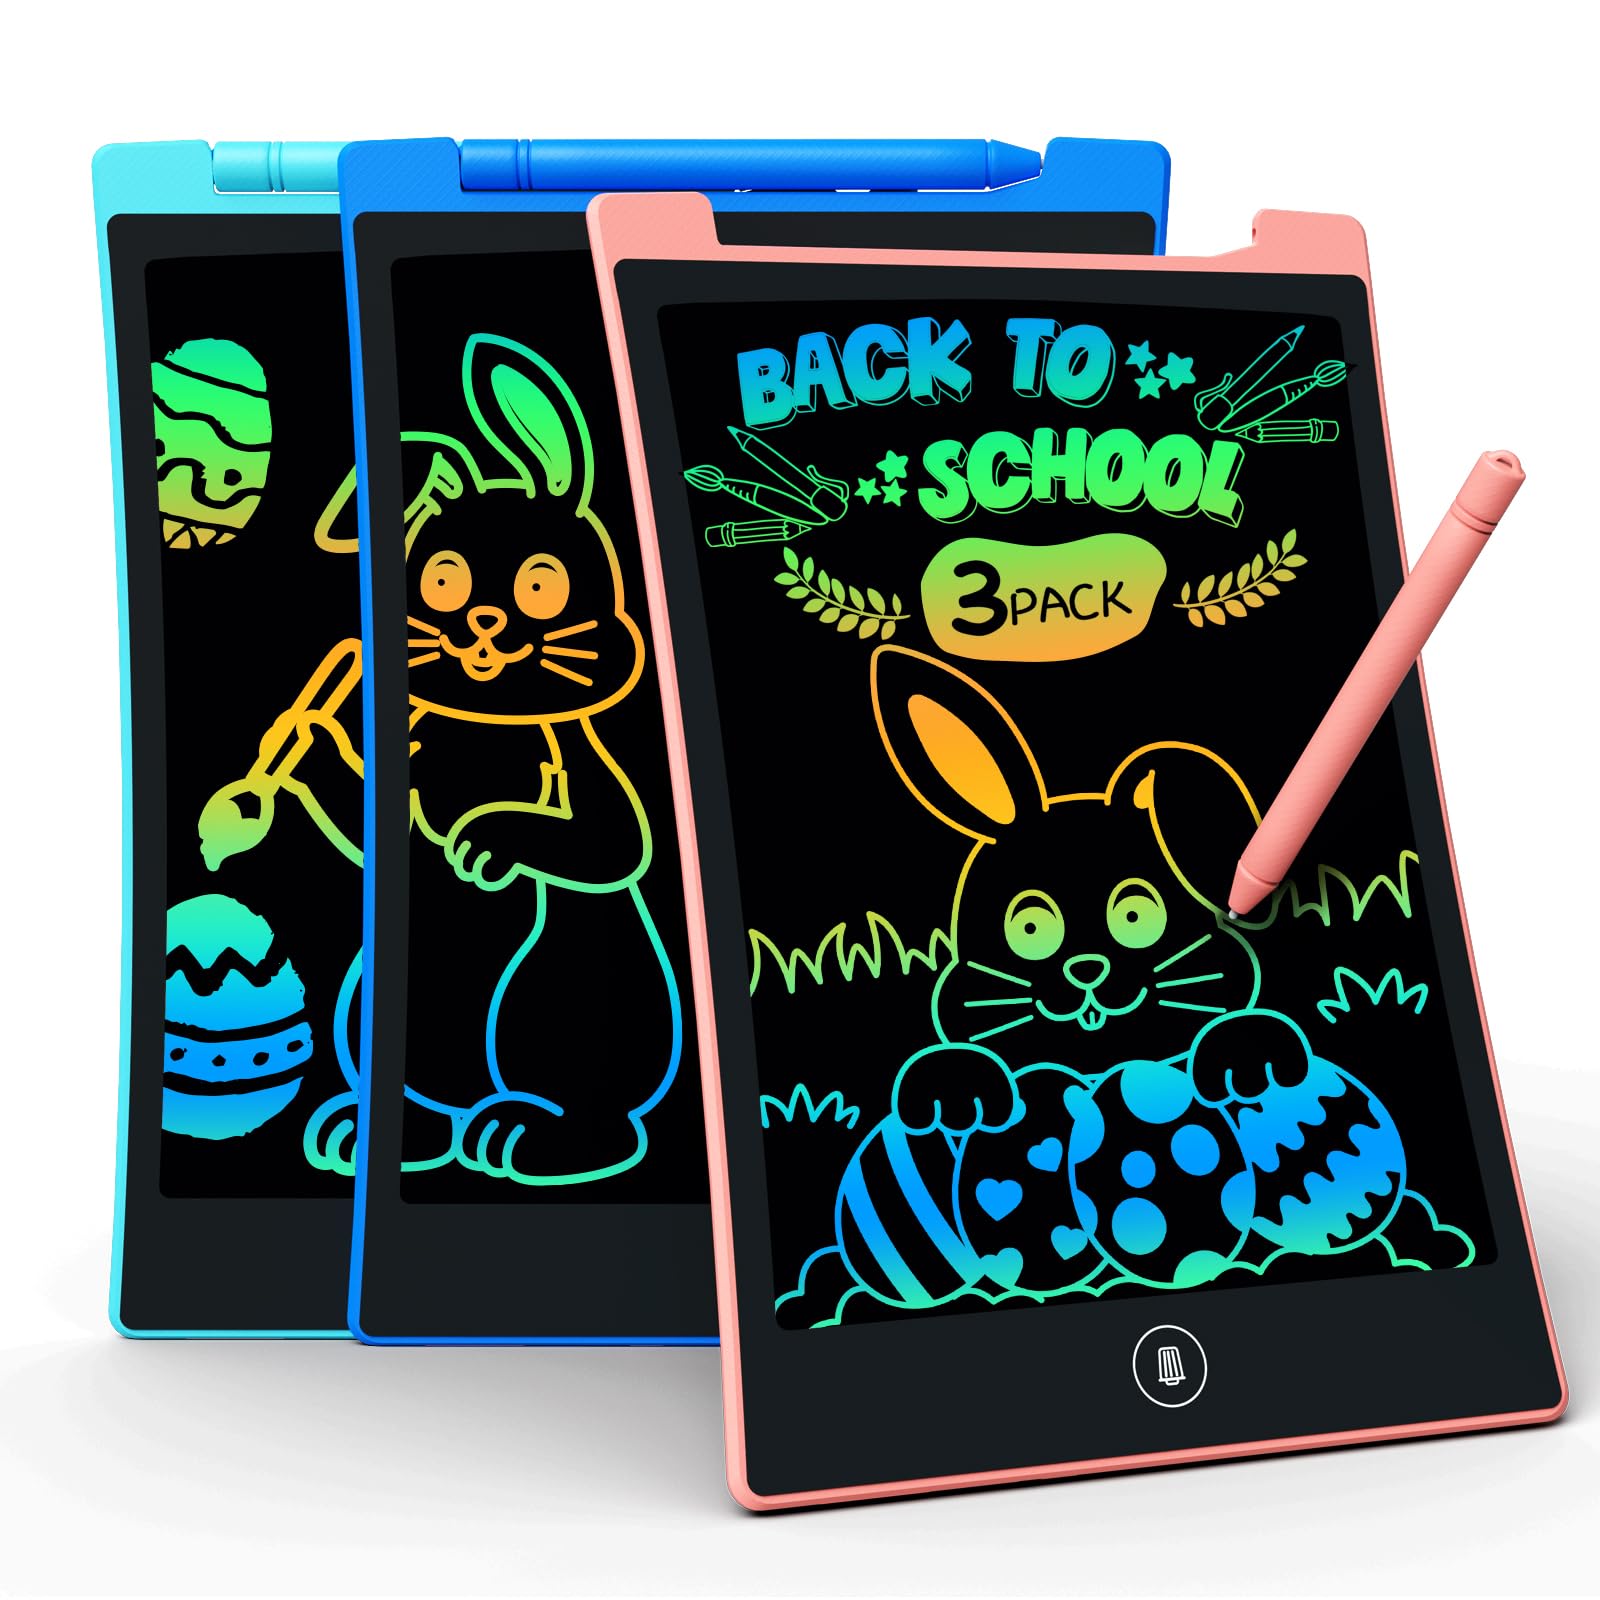 KOKODI Kids Toys 3 Packs LCD Writing Tablet, Colorful Toddler Drawing Pad Doodle Board Erasable, Educational Learning Toys Birthday Gifts for Girls Boys Age 3 4 5 6 7 8, Pink Blue Green